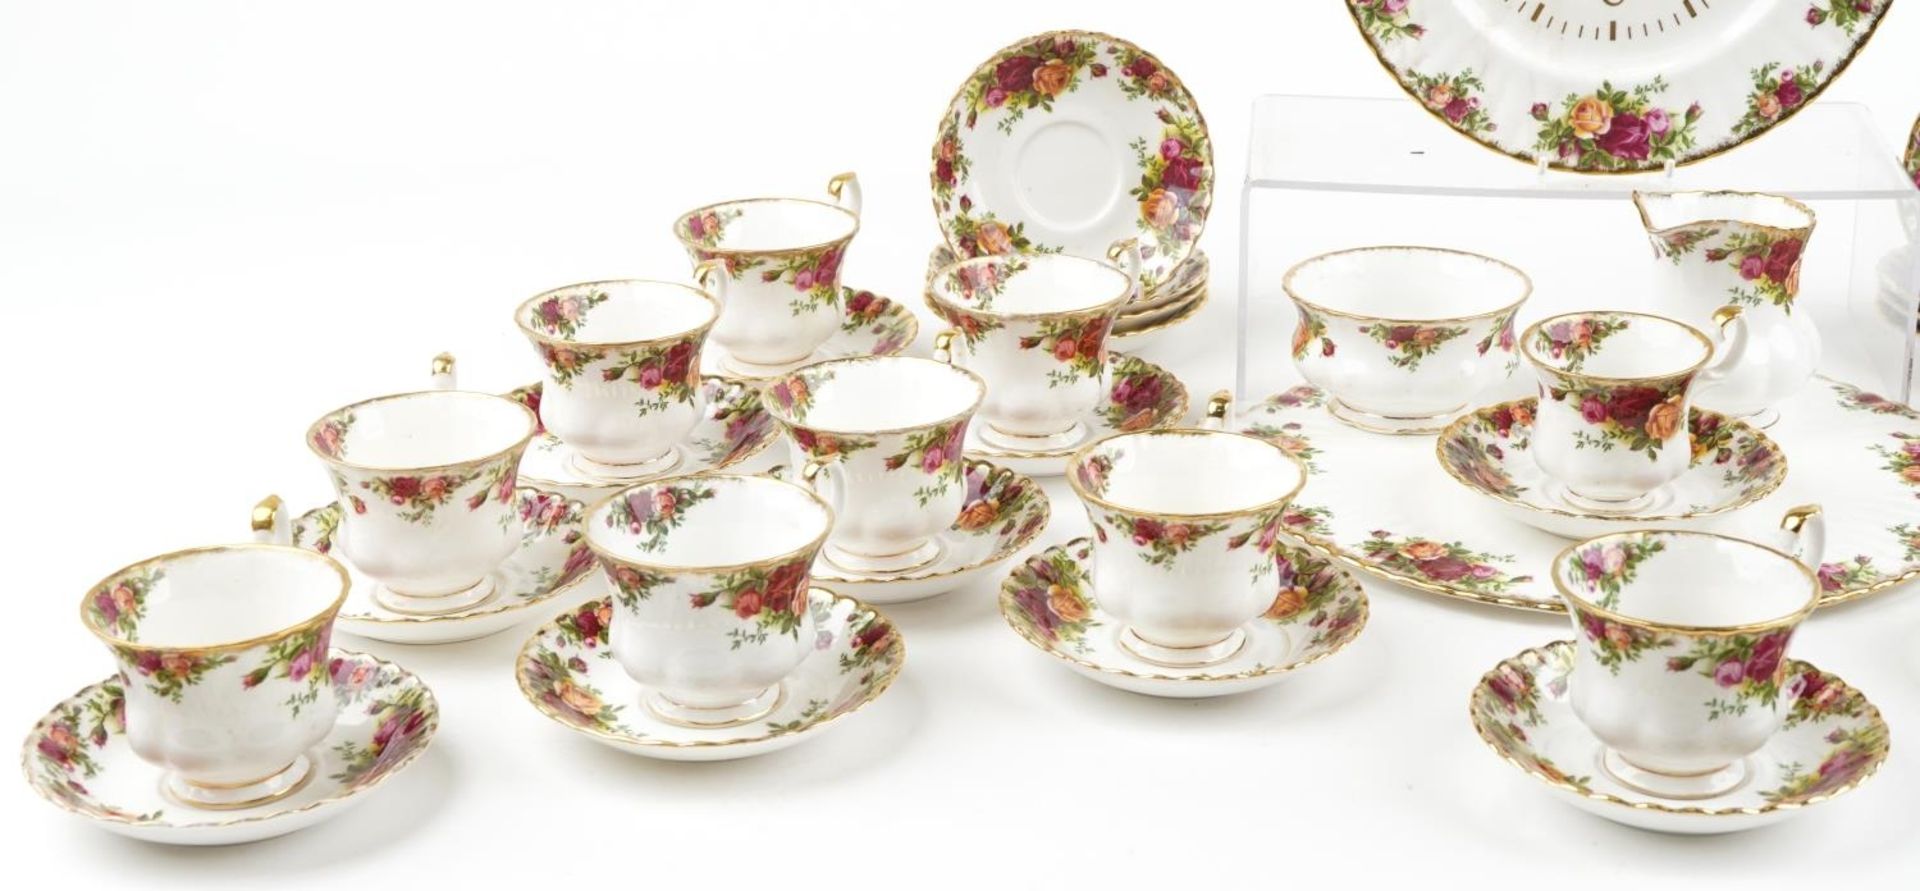 Royal Albert Old Country Roses china including various teaware, wall clock and cake tray, 35cm - Bild 3 aus 5